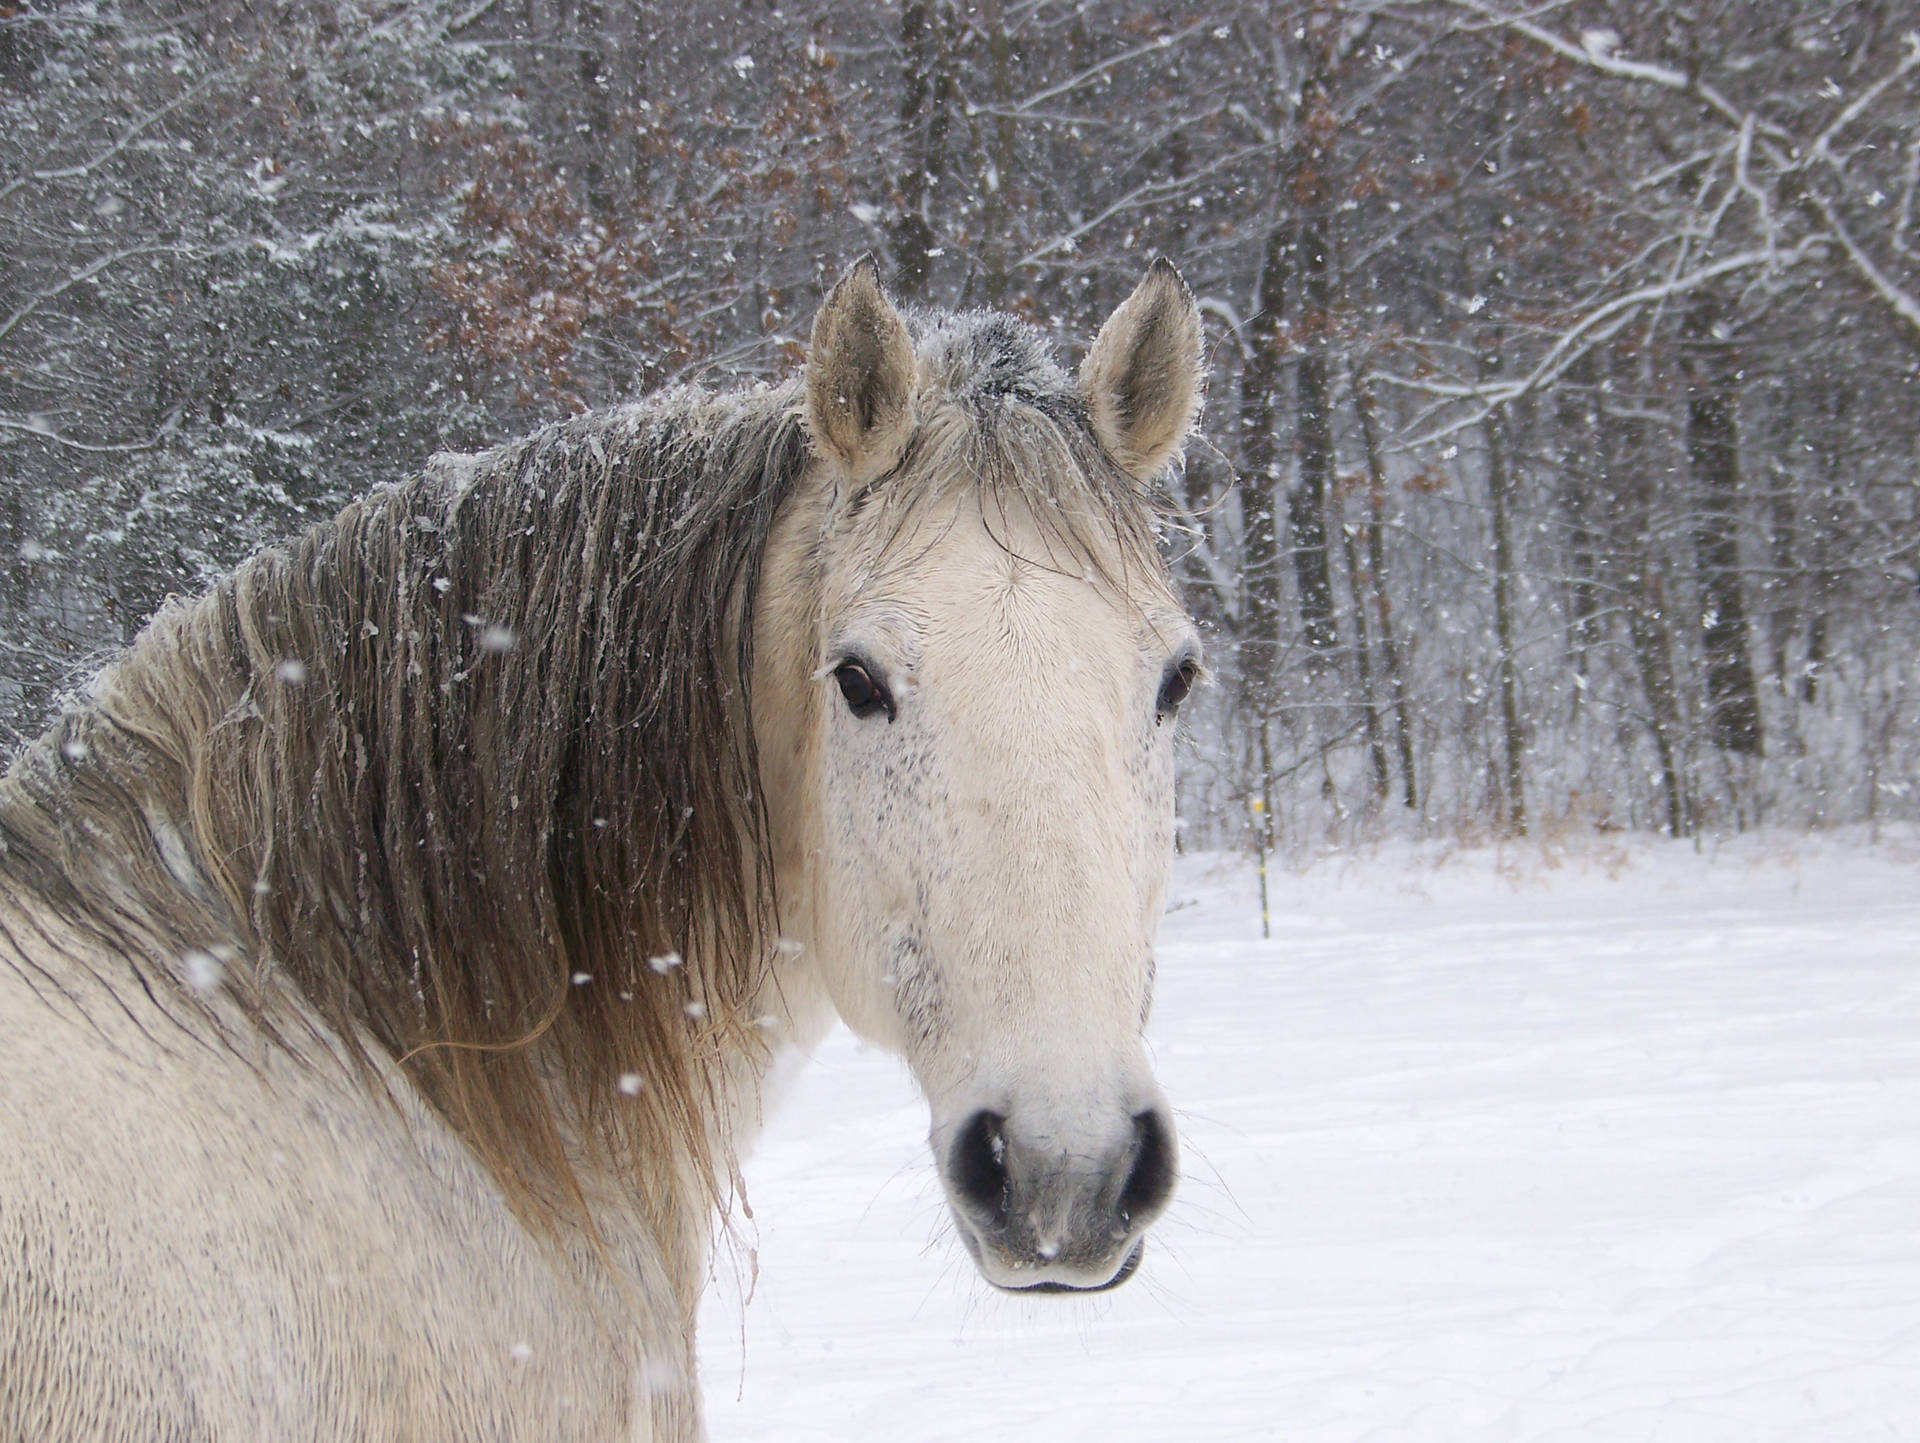 Cute Horse In Snowy Forest